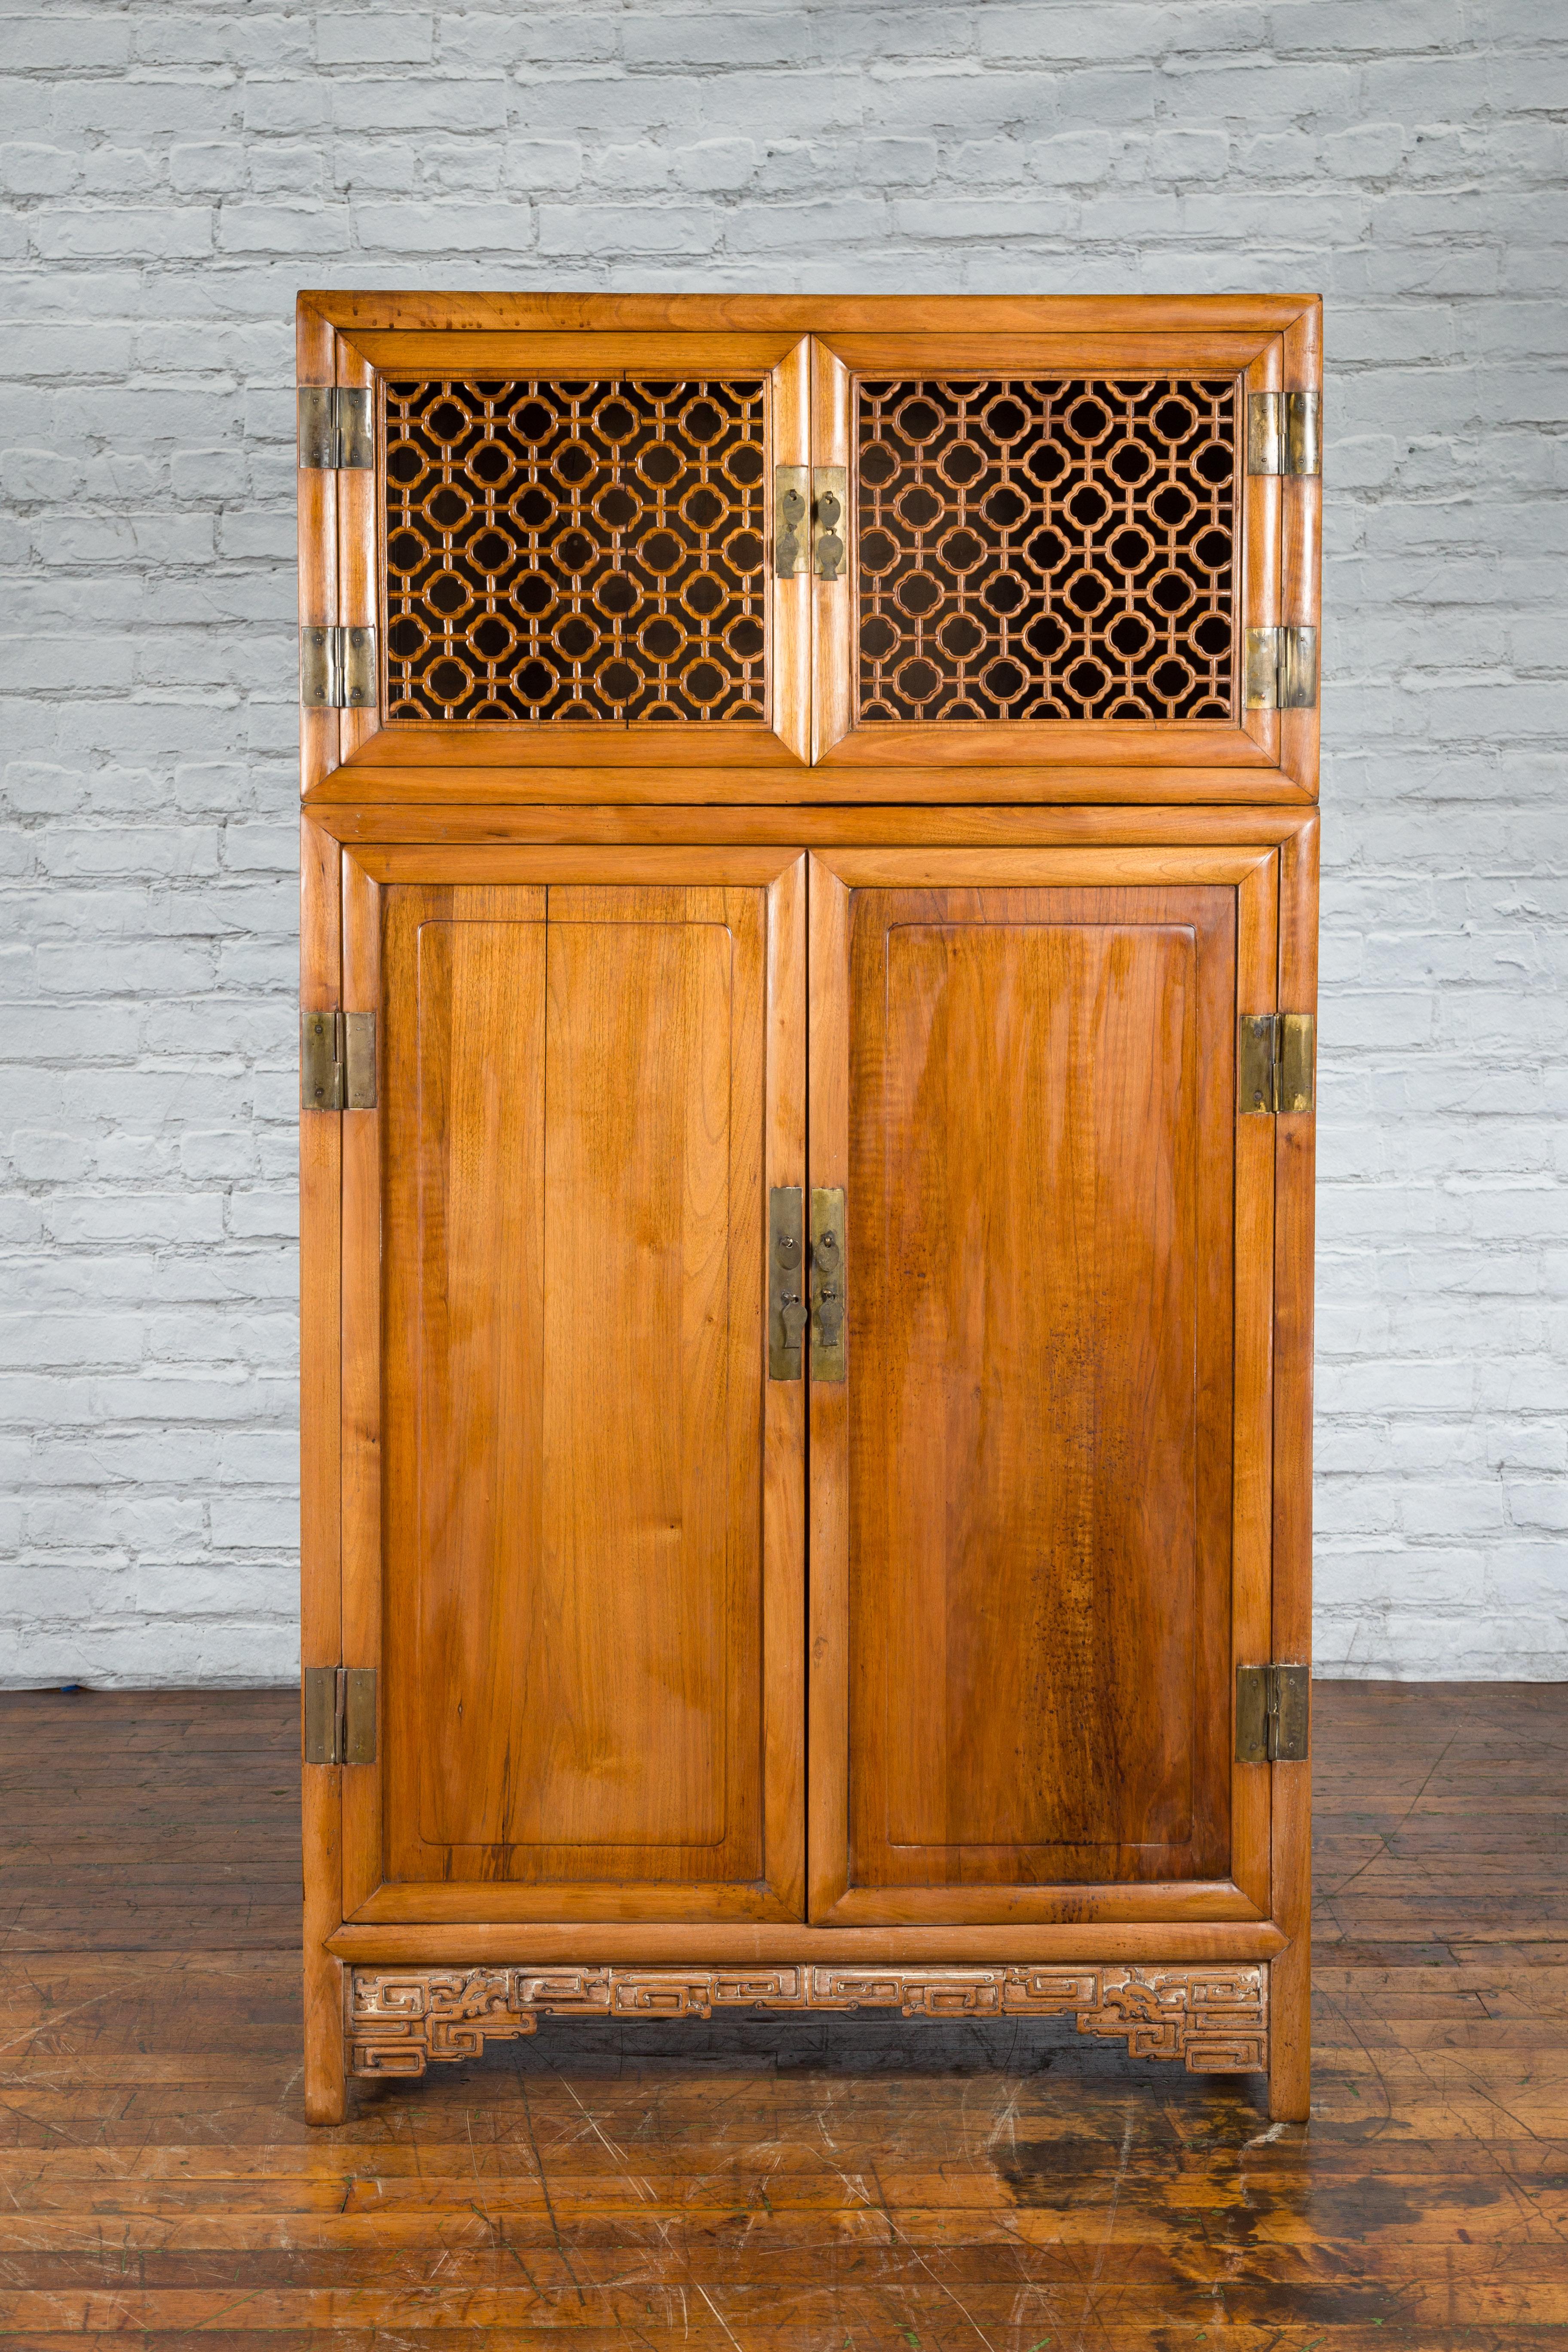 A large Chinese Qing Dynasty period wooden kitchen cabinet from the 19th century with fretwork motifs, carved scrolling apron, brass hardware and hidden drawers. Created in China during the Qing Dynasty period in the 19th century, this large